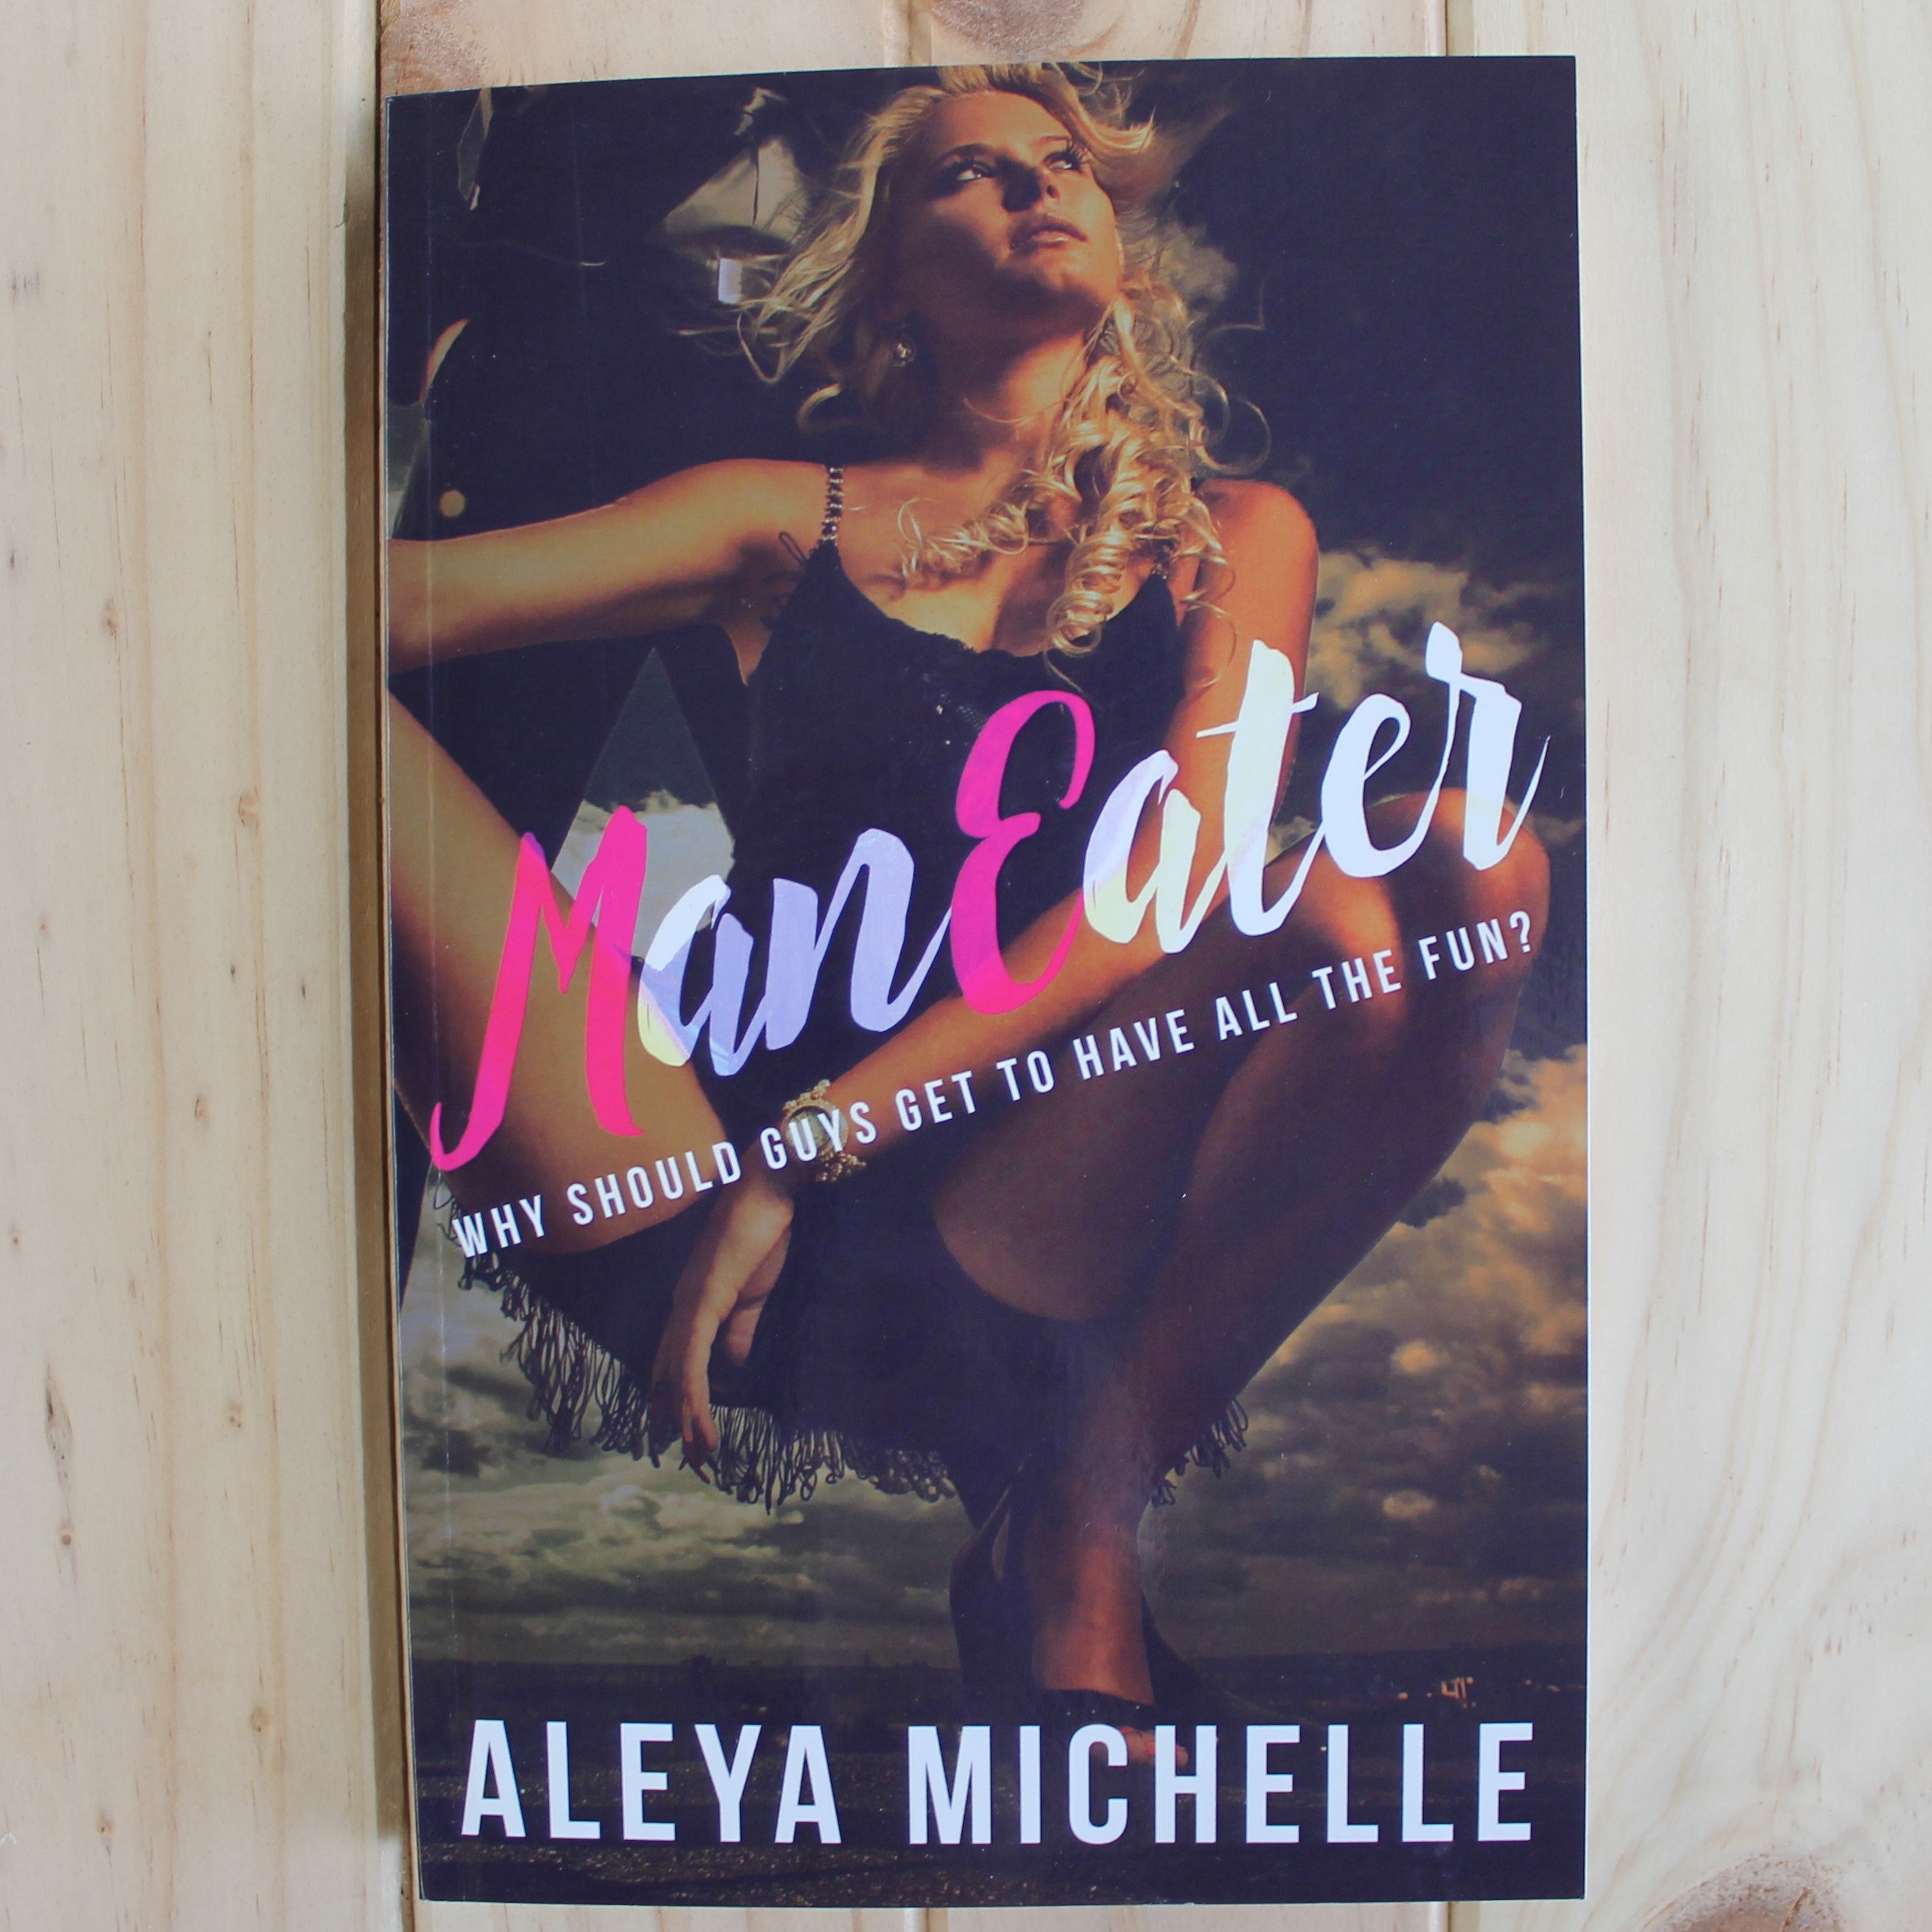 ManEater by Aleya Michelle